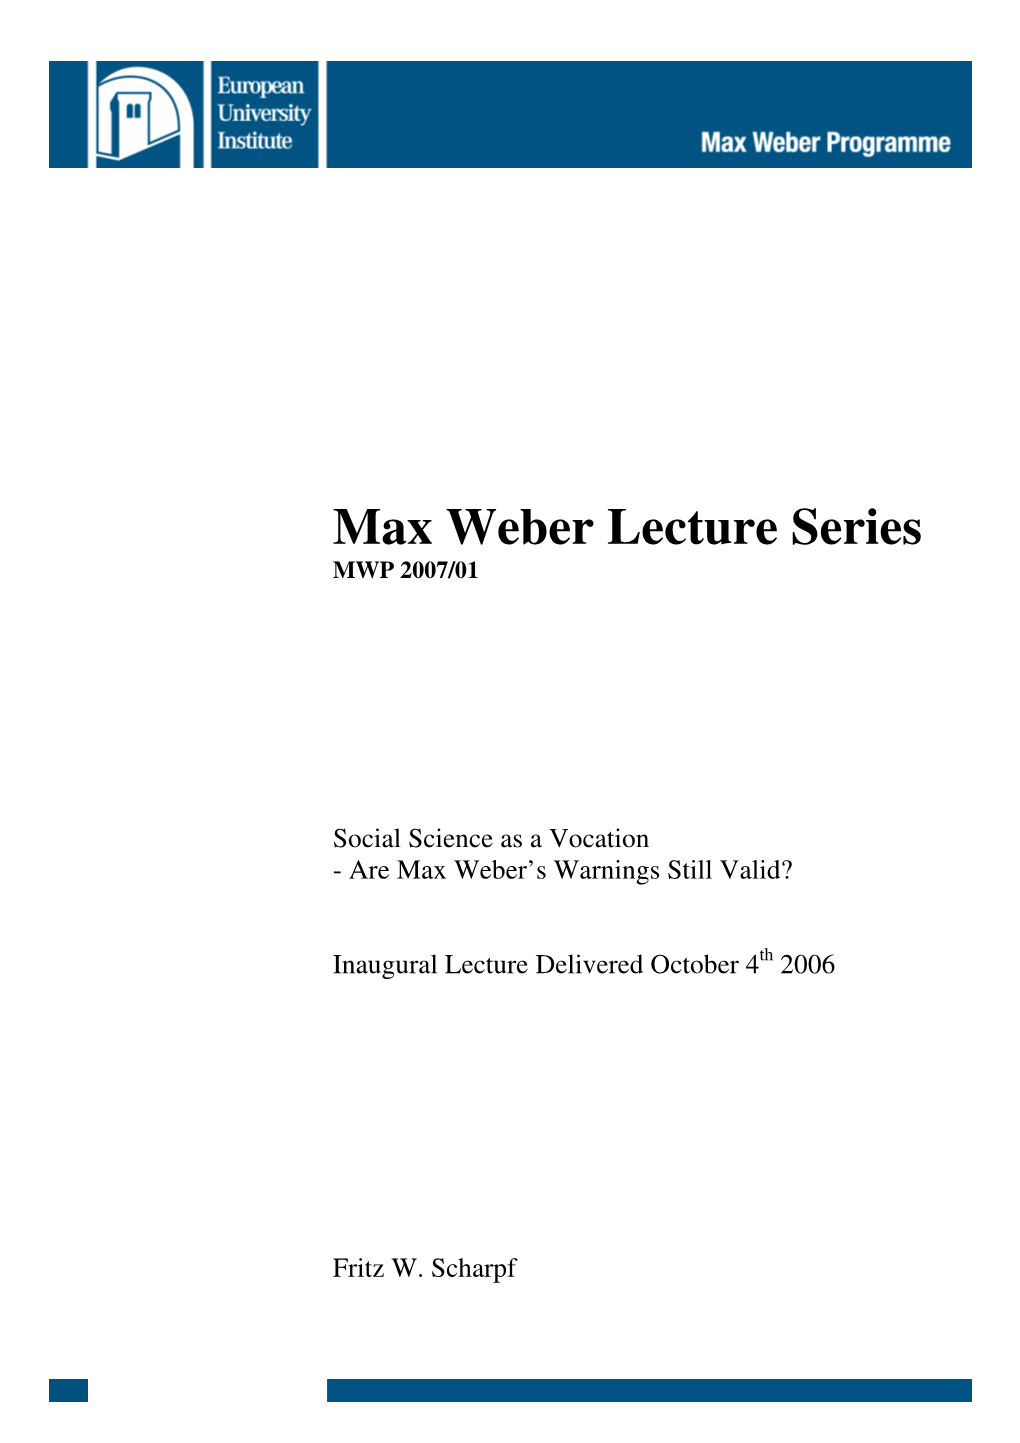 Max Weber Lecture Series MWP 2007/01